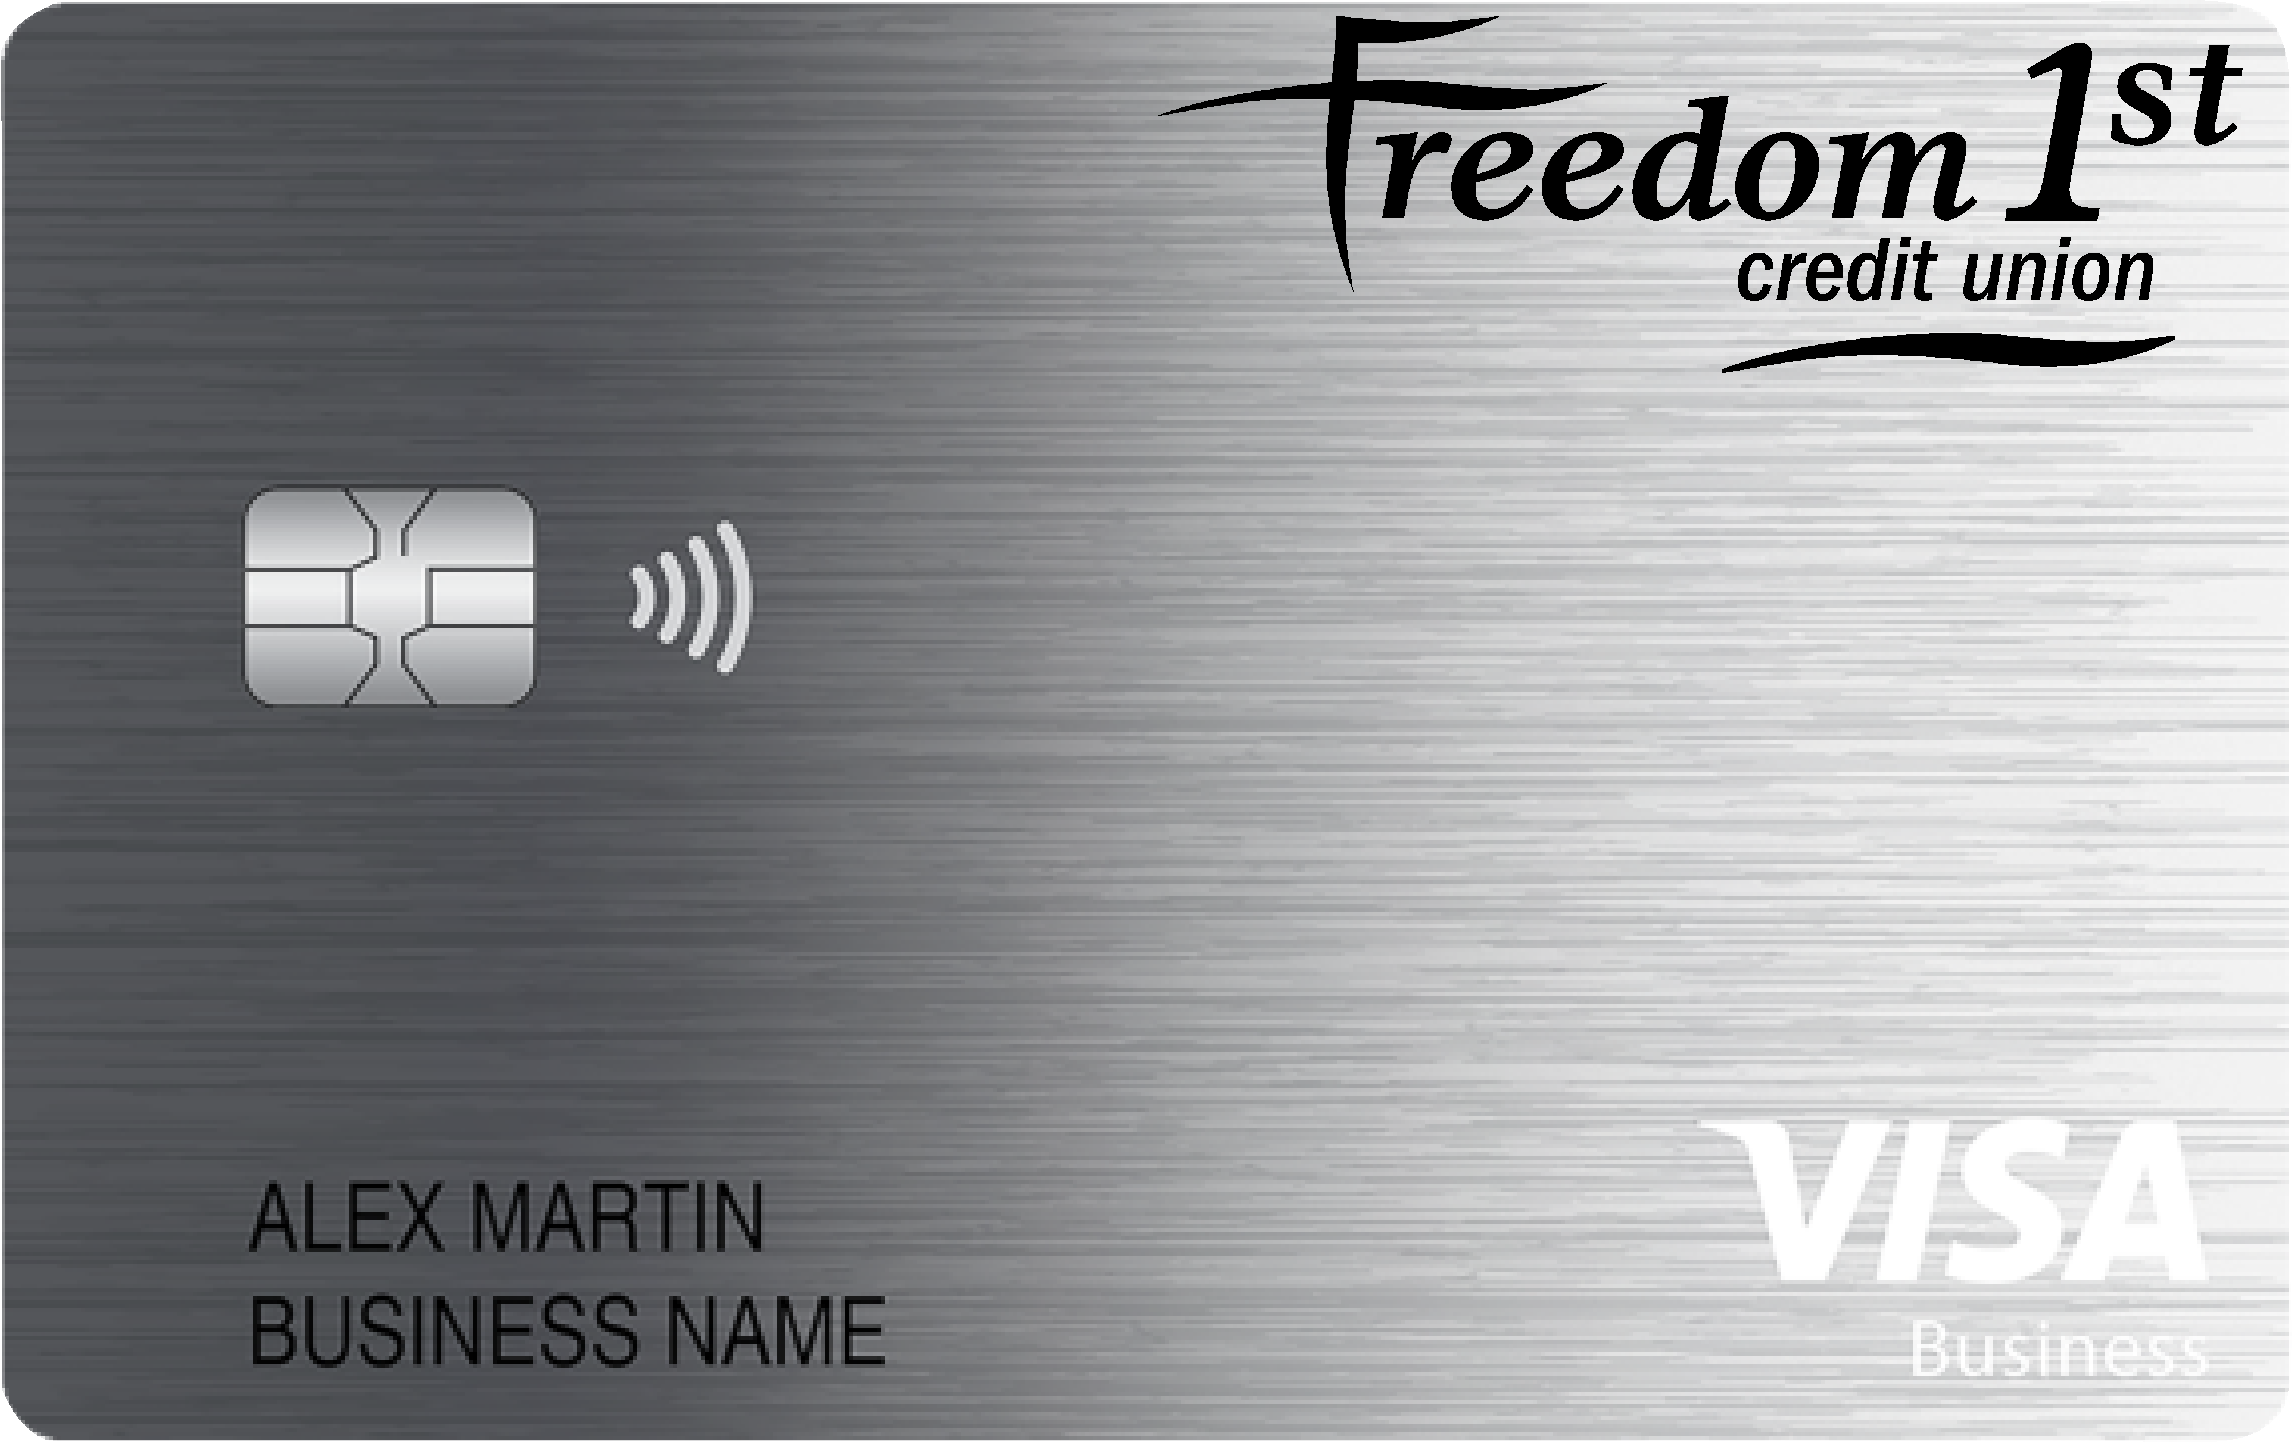 Freedom 1st Credit Union Business Cash Preferred Card